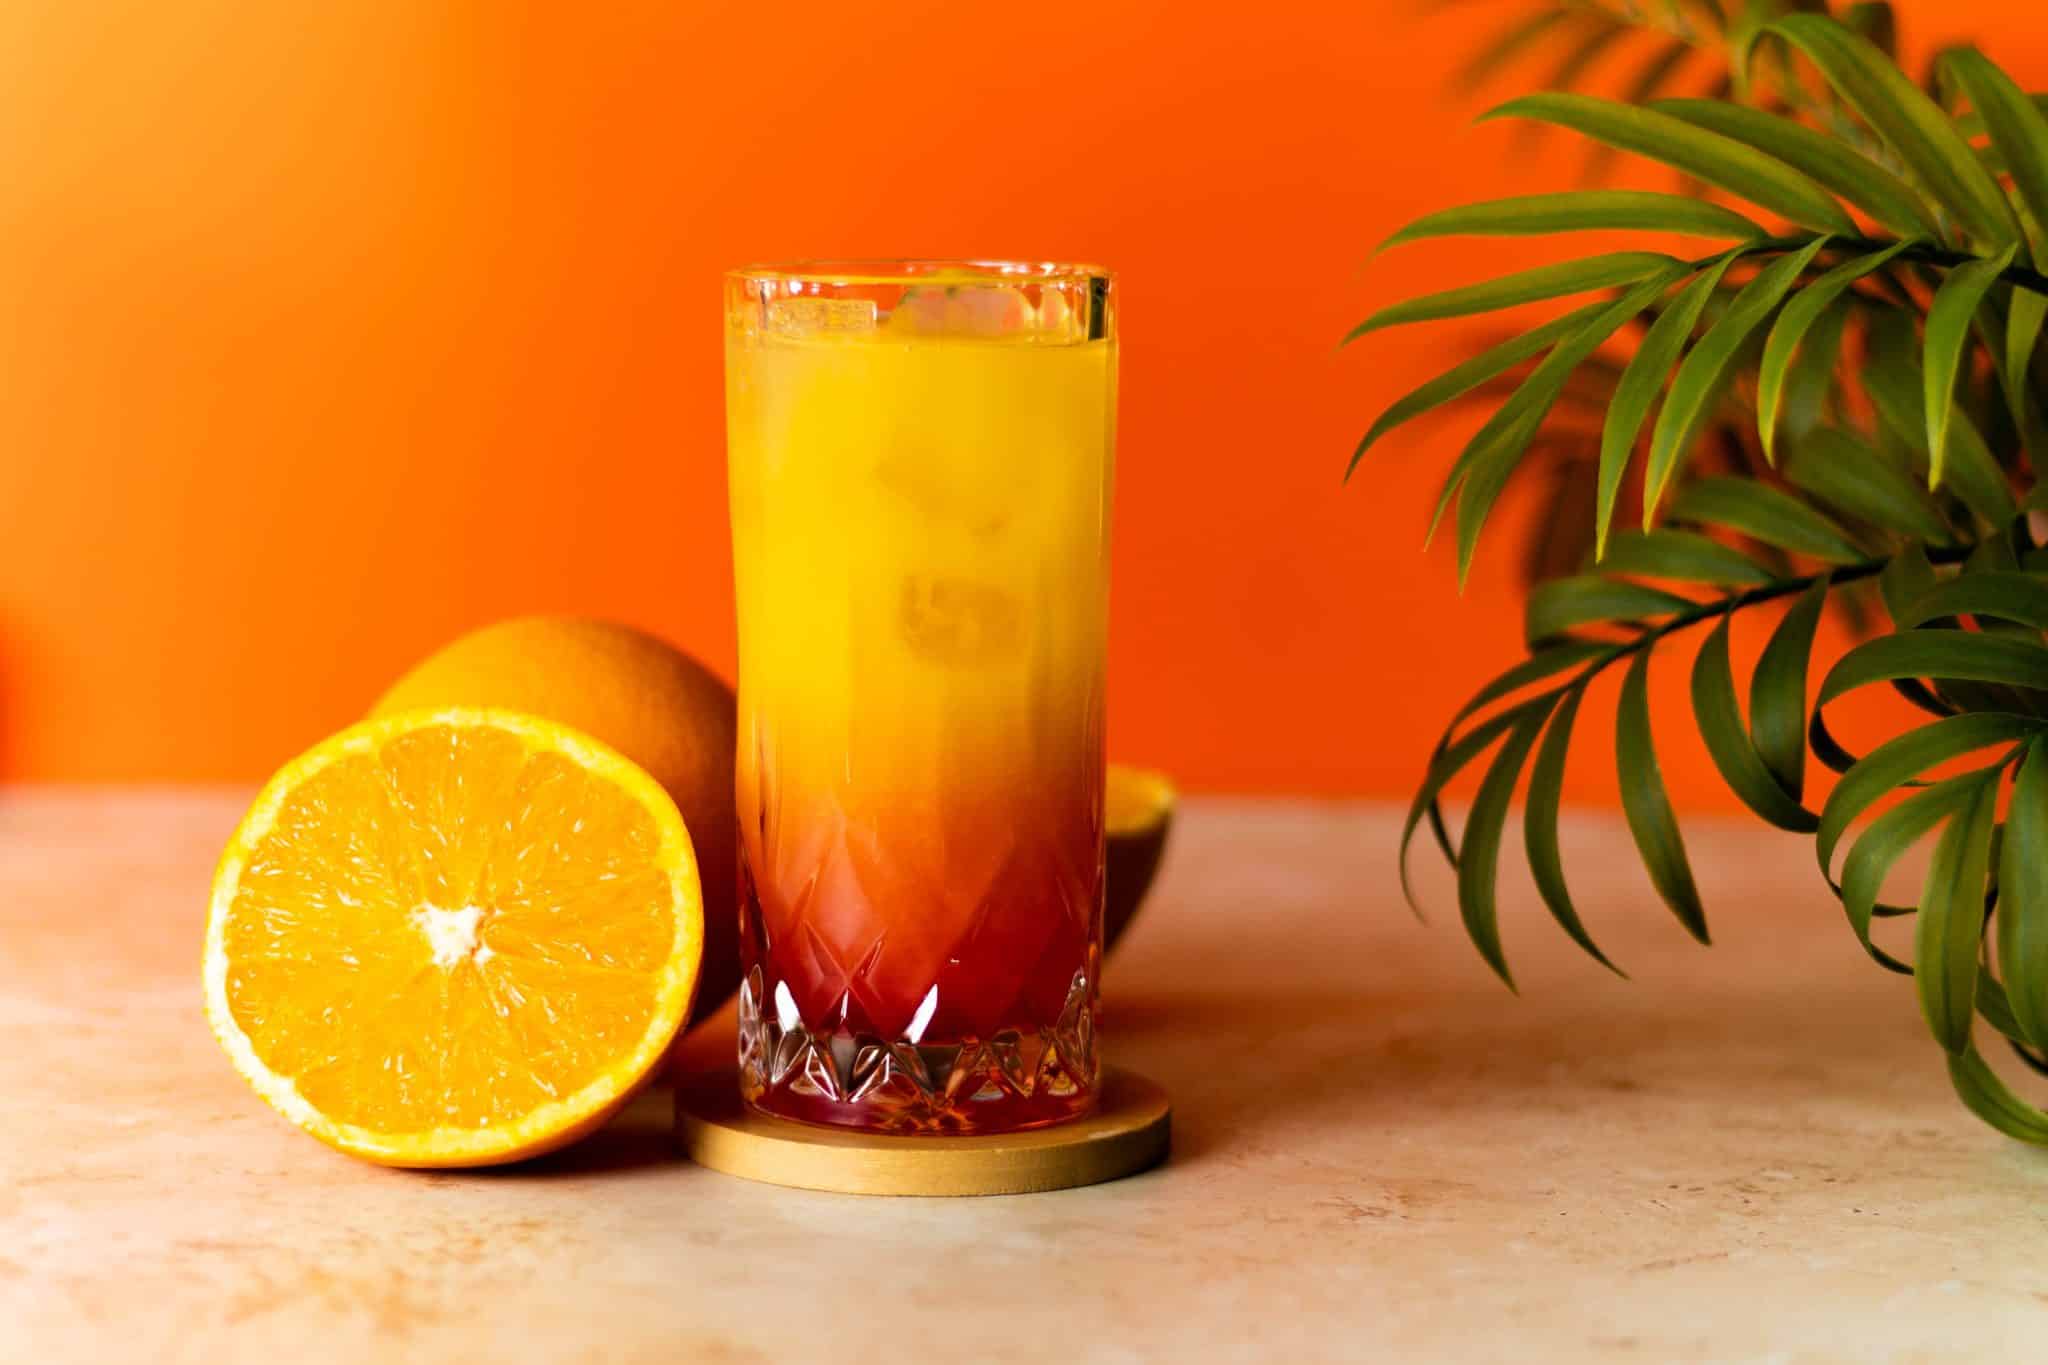 A side shot of a Tequila Sunrise cocktail in a highball glass on a brown coaster placed on a beige table with a half orange on one side and a green plant on the other side.